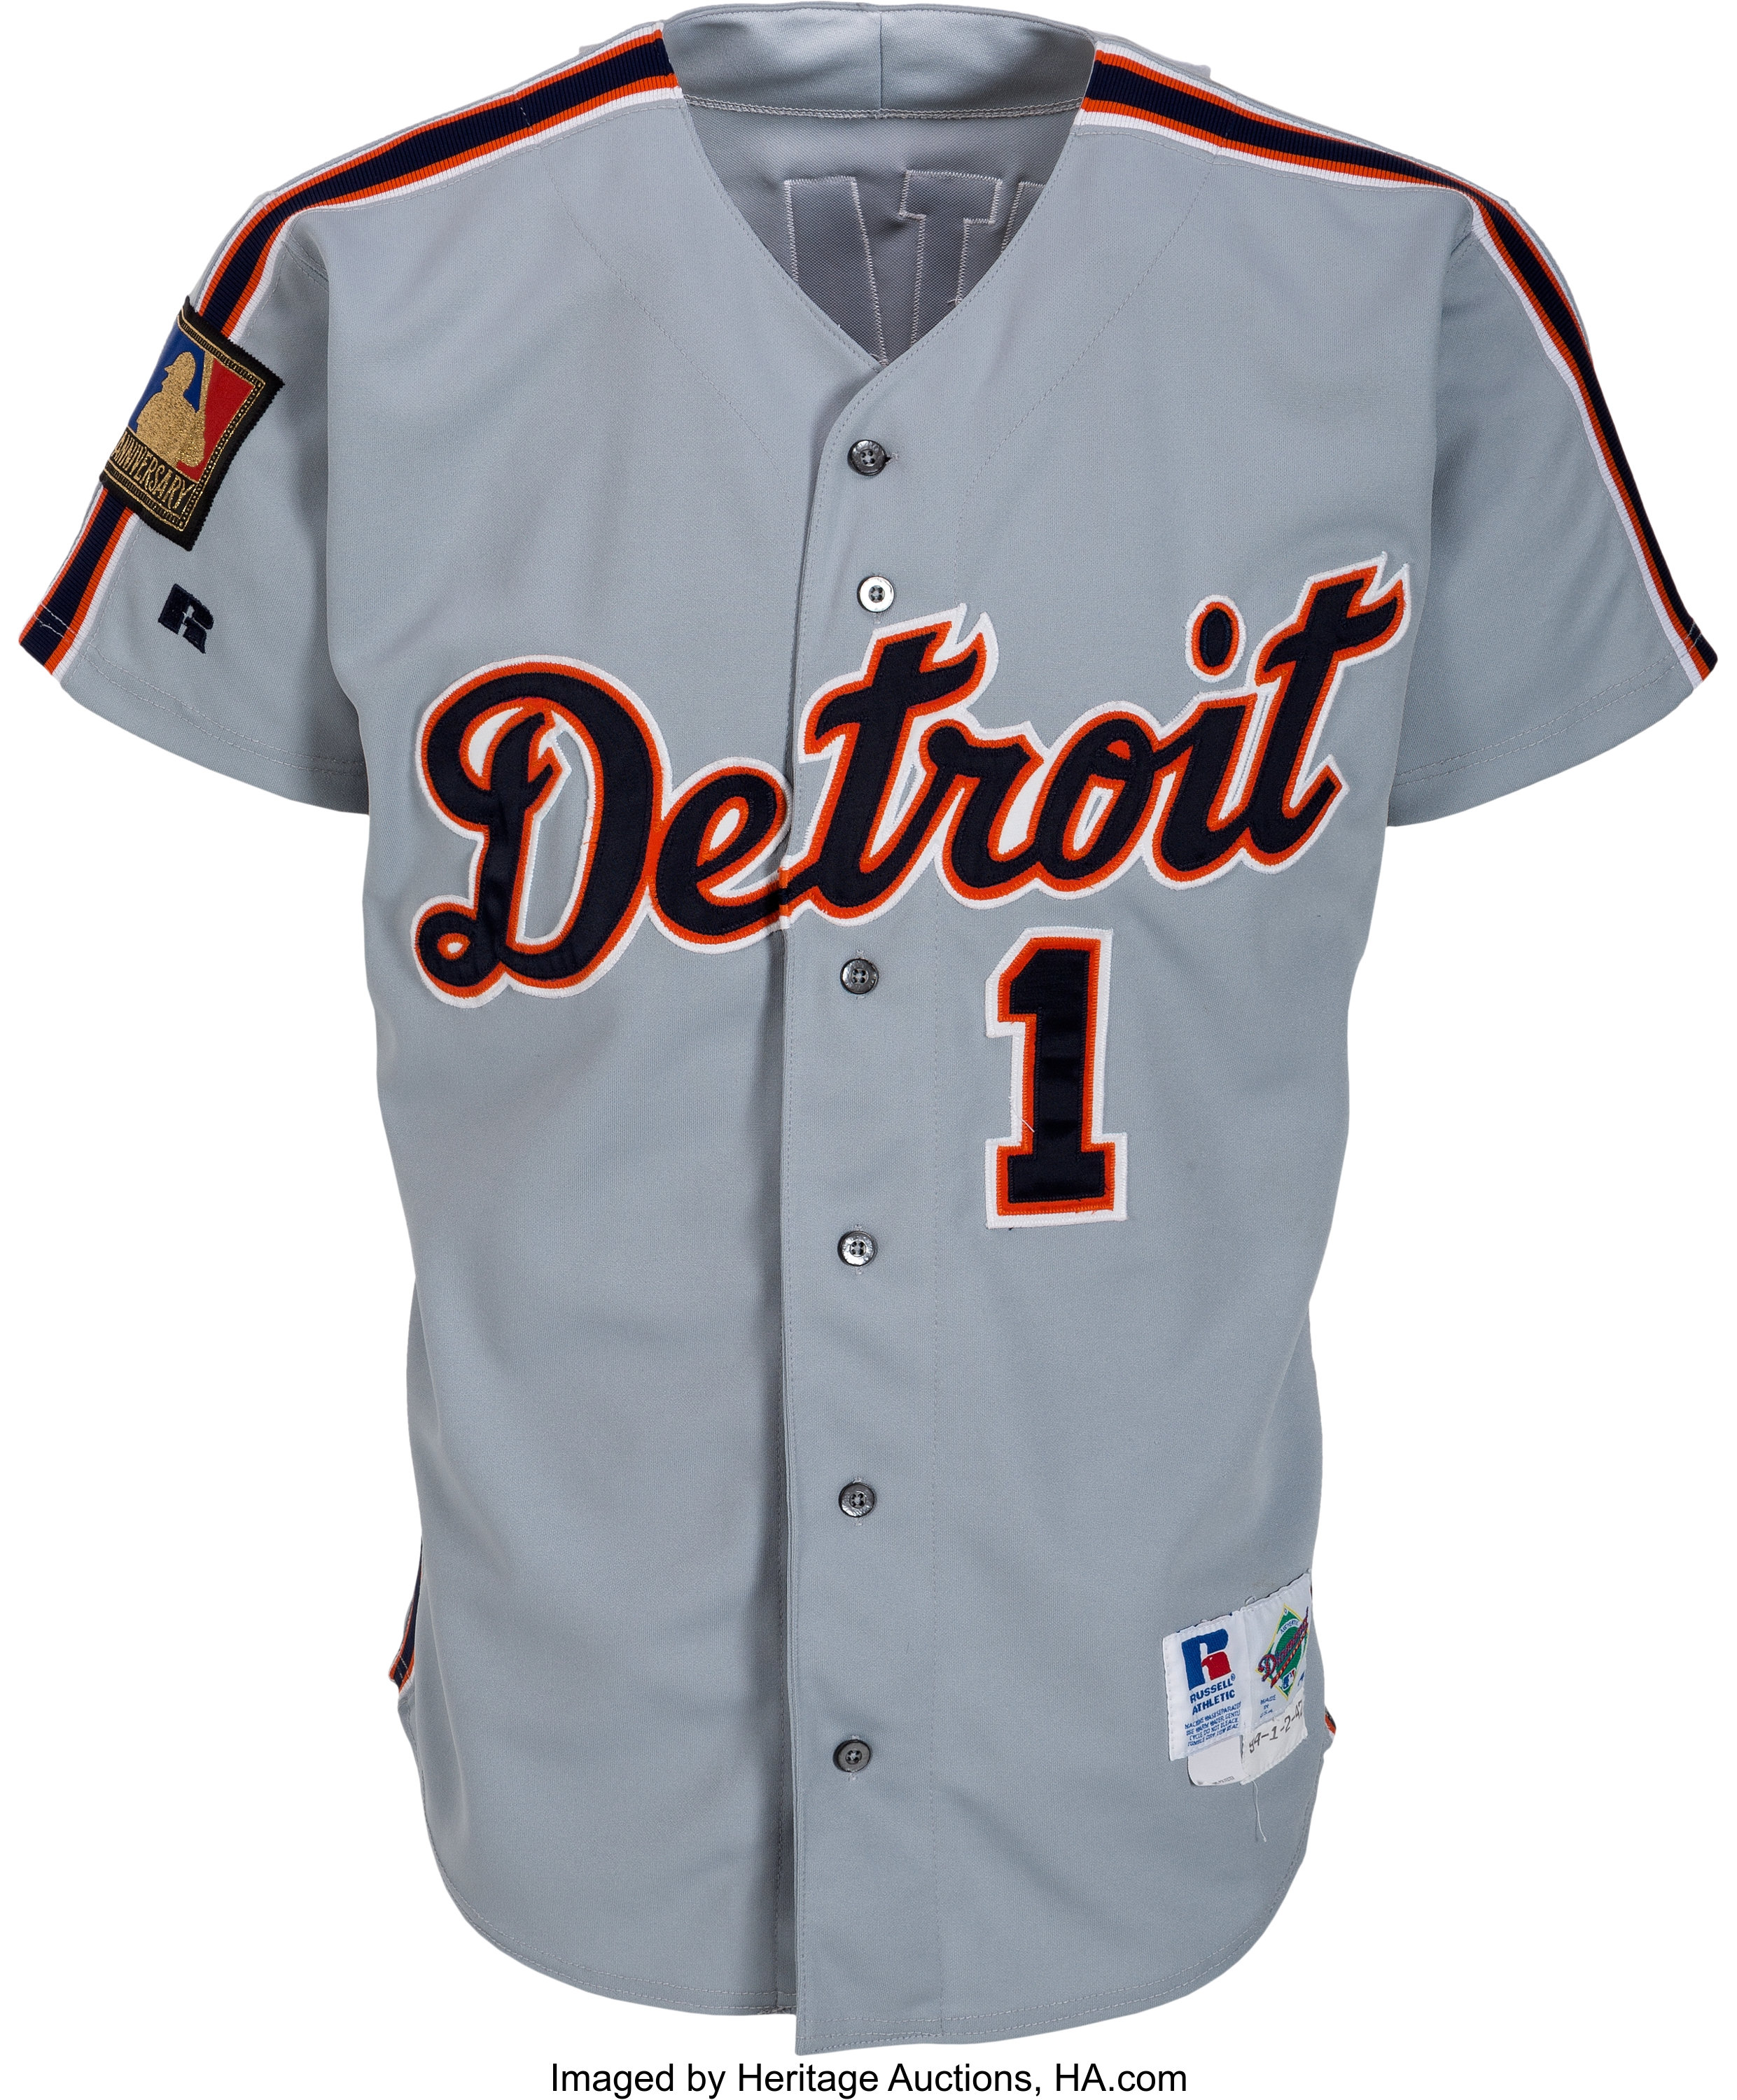 Detroit Tigers Lou Whitaker SGA Retirement Jersey Size M New in Package *